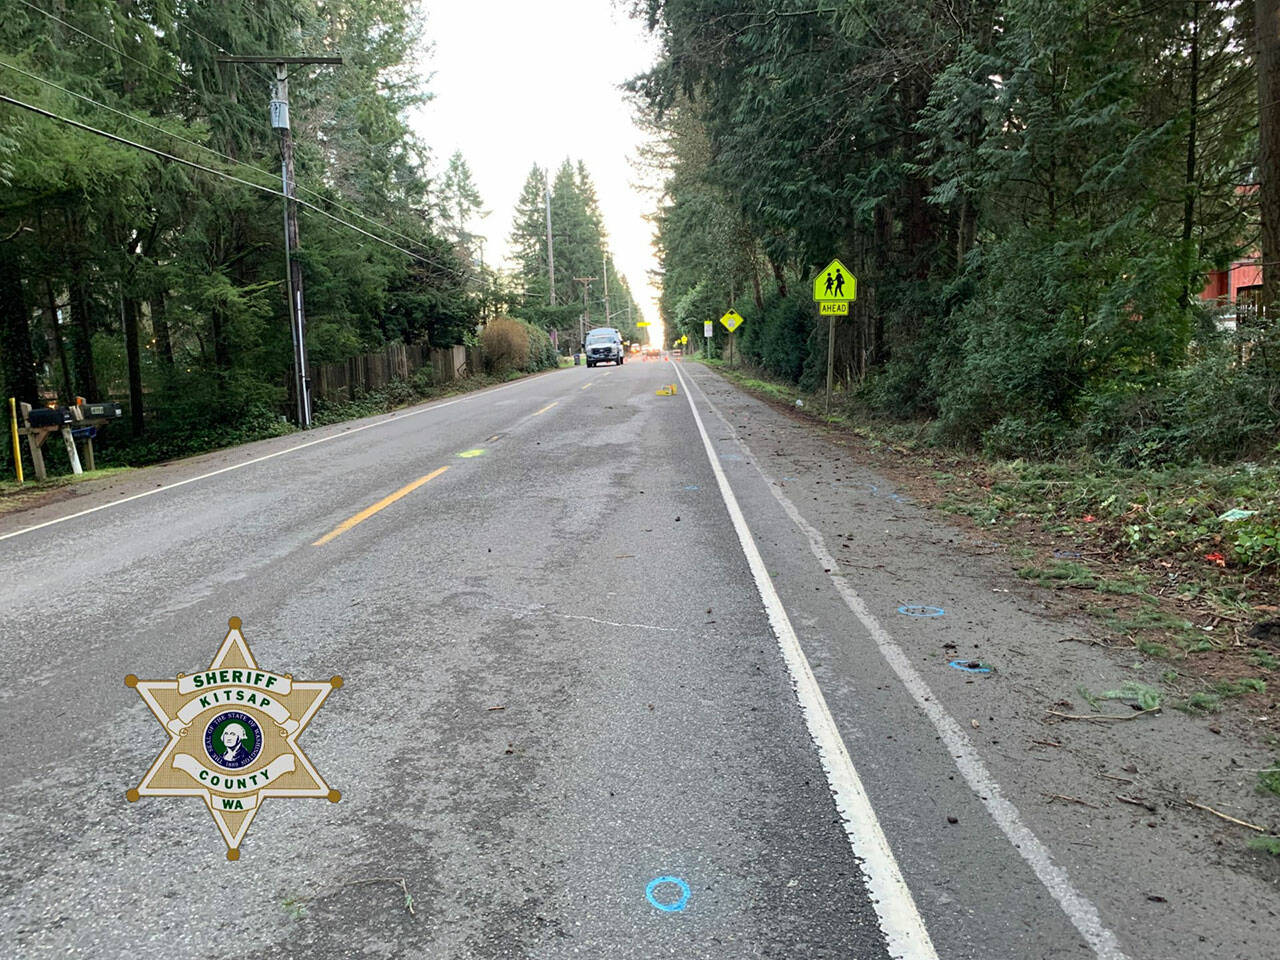 The scene at Central Valley Road where 63-year-old Poulsbo resident John Skubic was killed last Friday after a hit and run while riding his bike. Courtesy photo